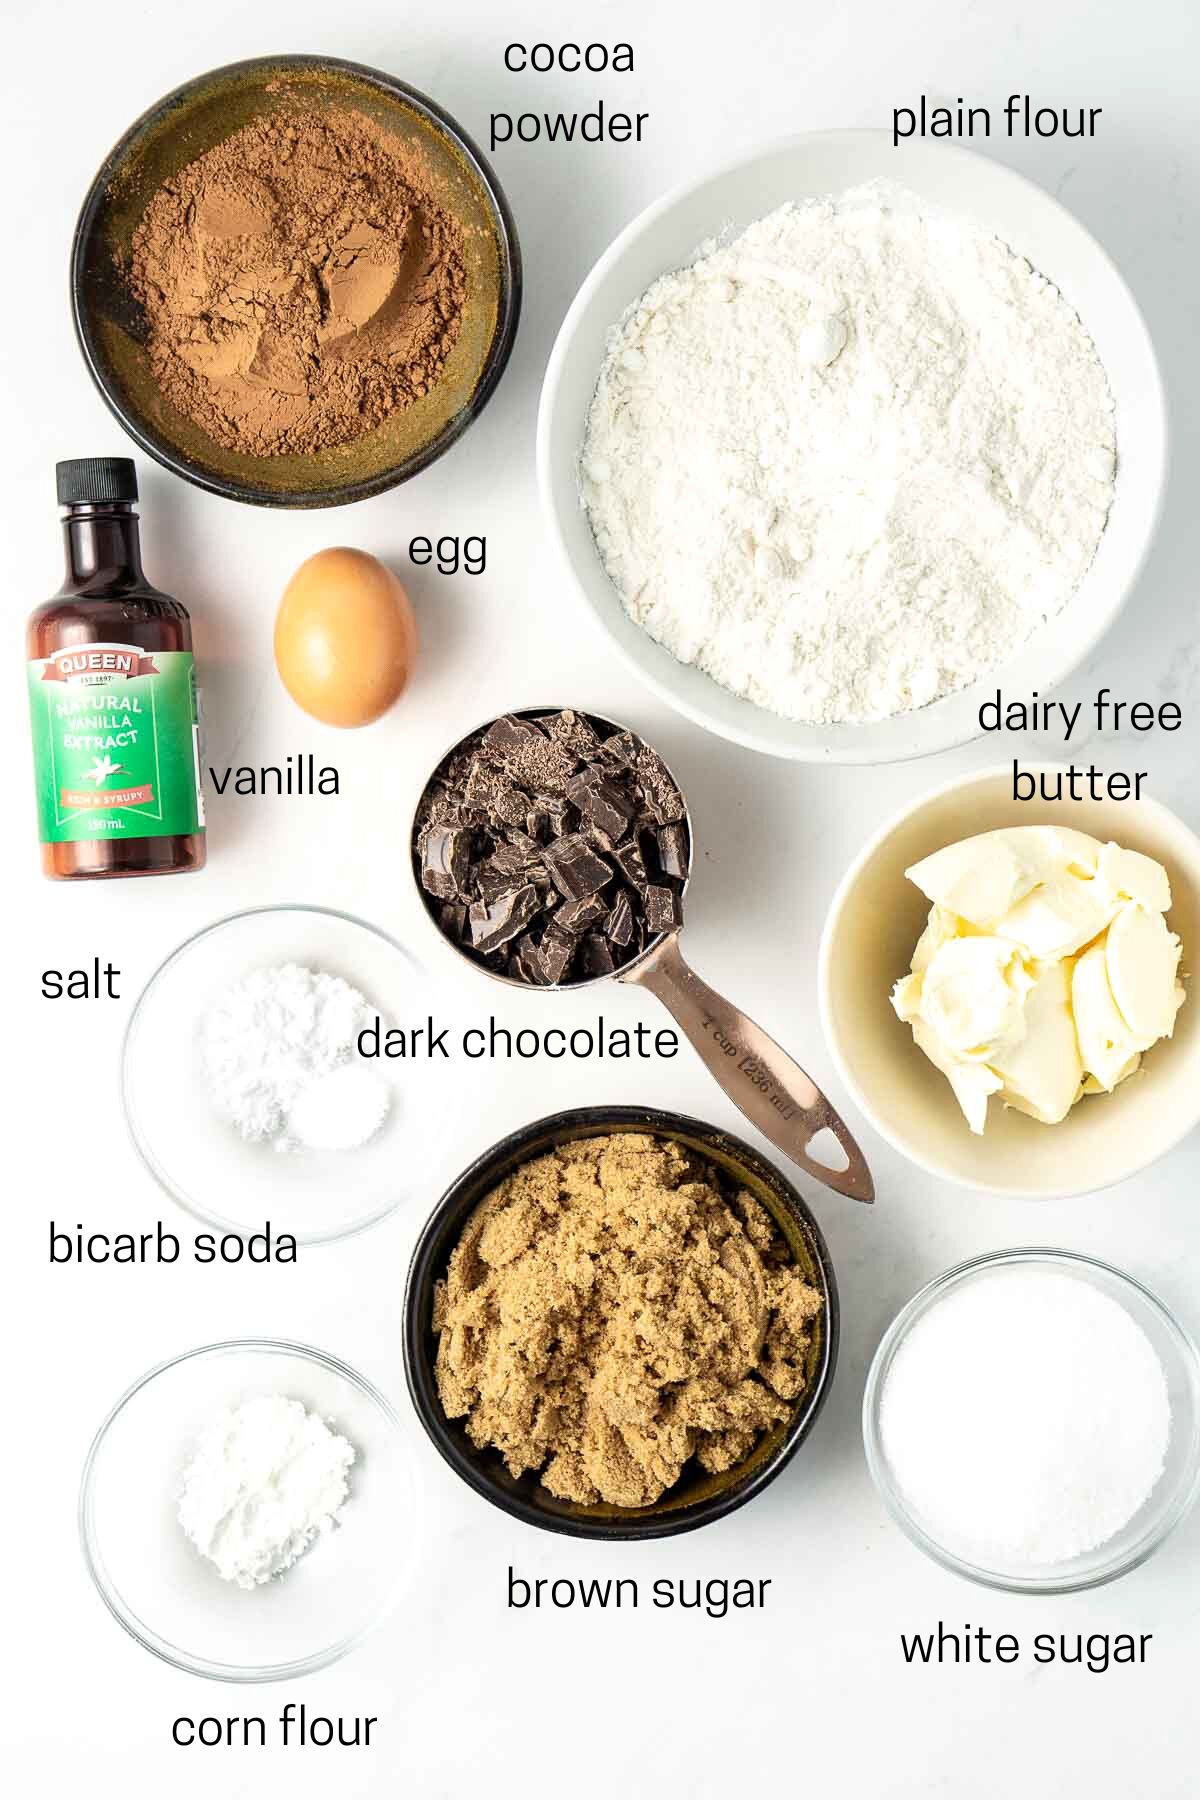 All ingredients needed for chocolate cookies laid out in small bowls.